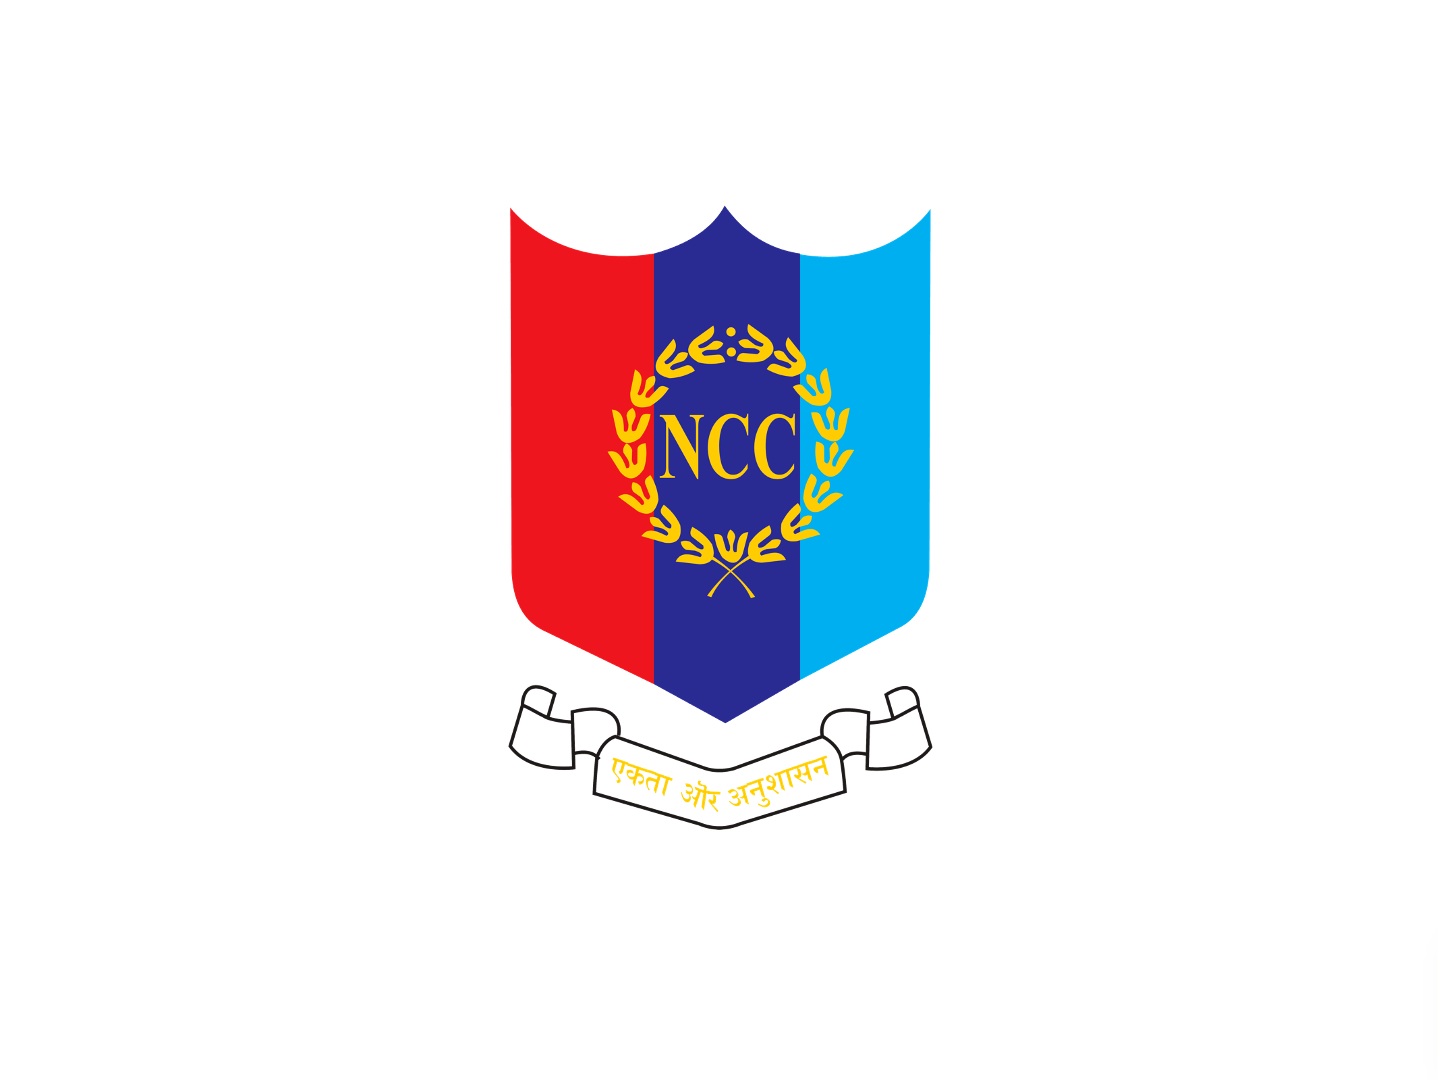 LOGO OF NCC | Description & Meaning - YouTube